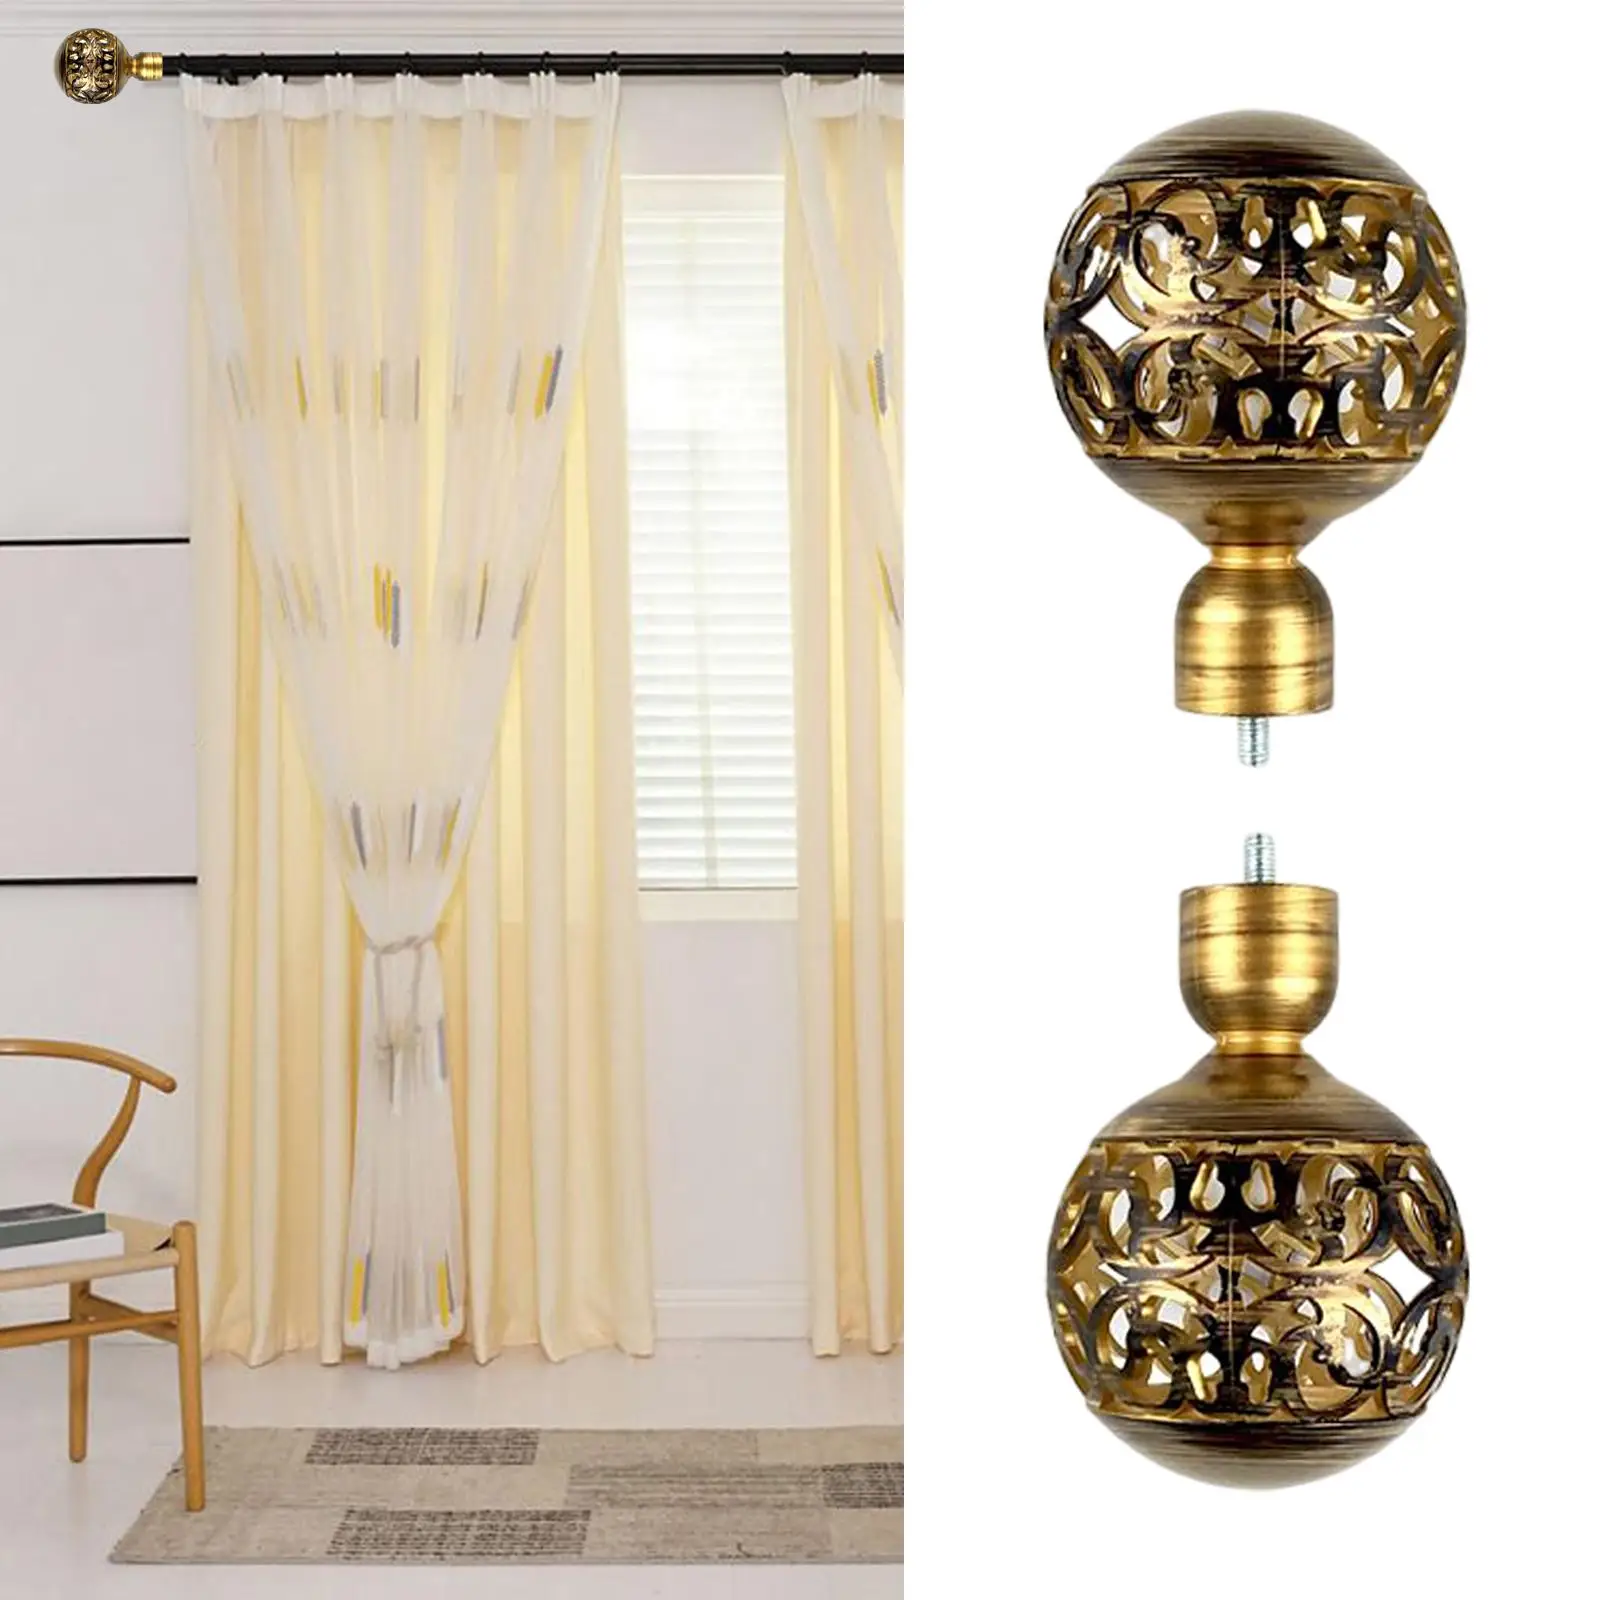 2Pcs Hollow Curtain Rod Finials 3/4 inch Diameter Decorative Vintage Drapery Rod Finials for Office Home Living Room Bathroom